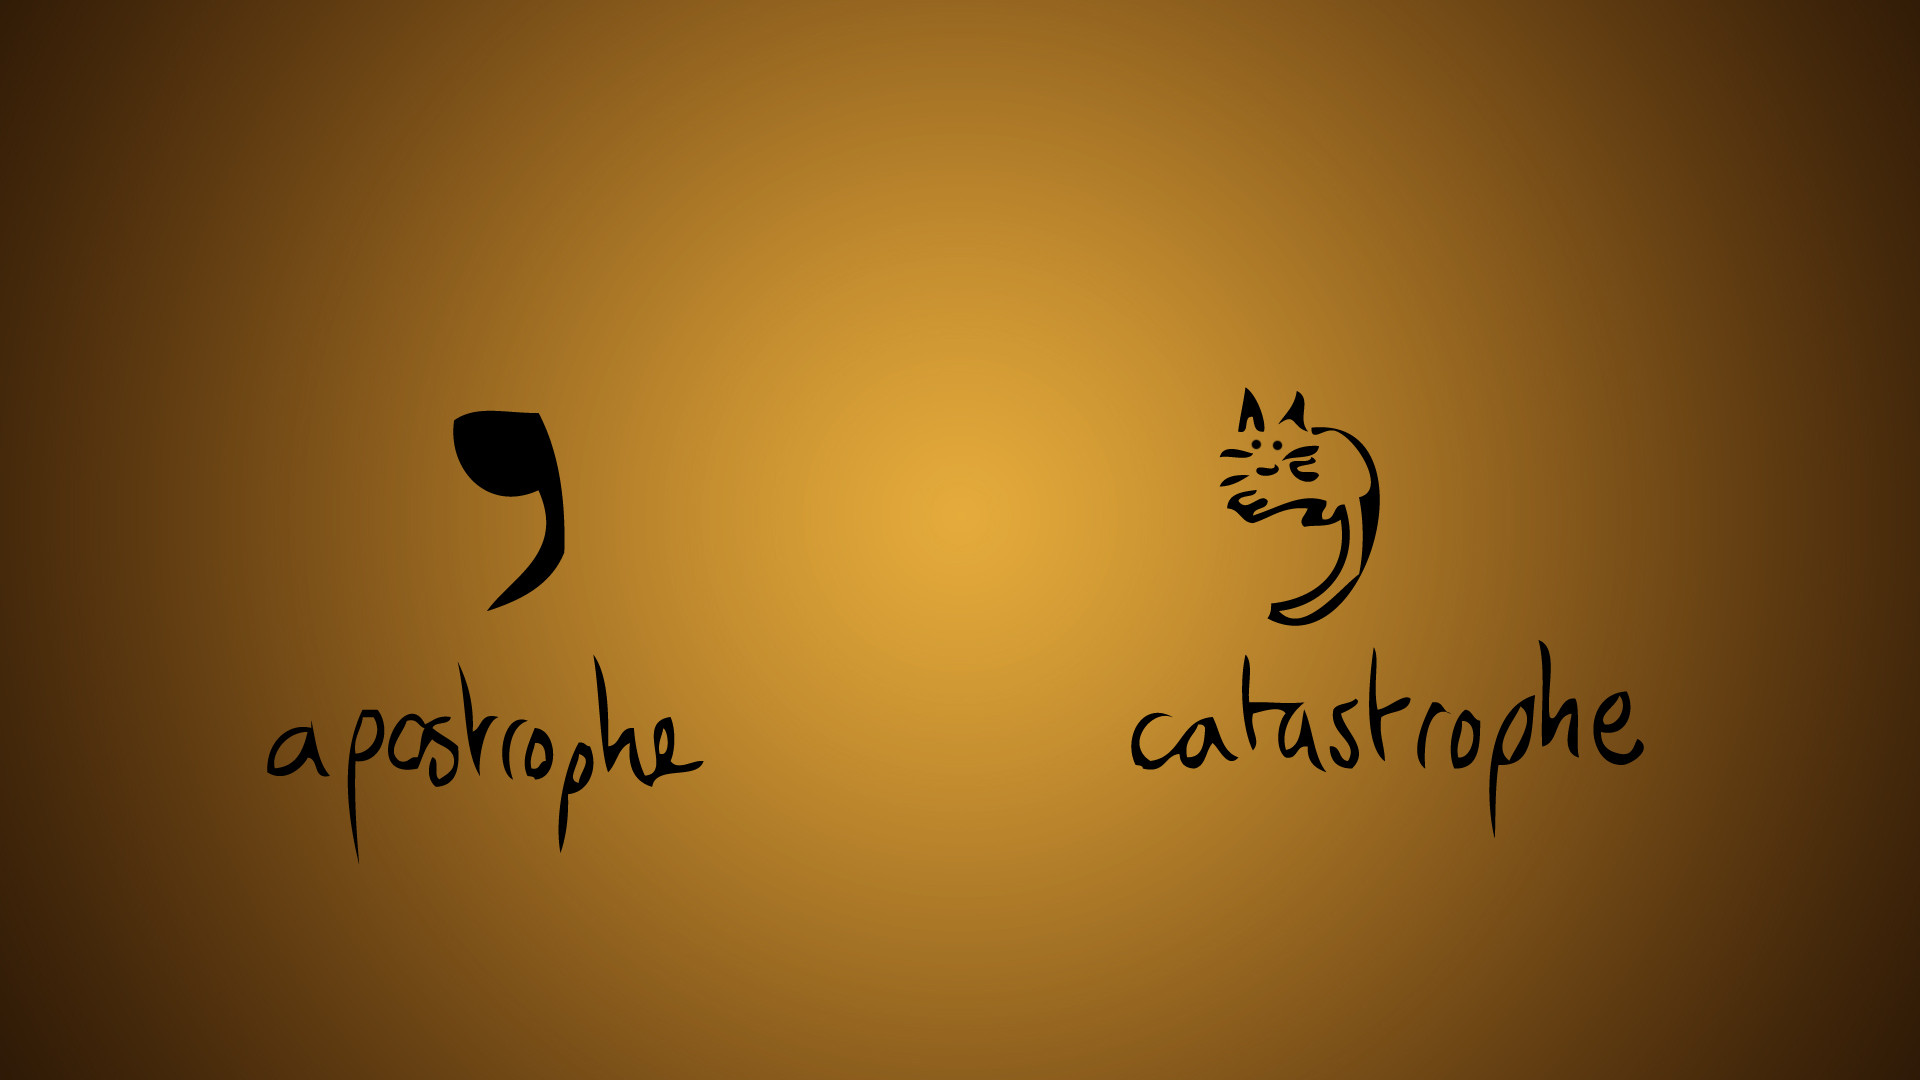 Apostrophe and Catastrophe Wallpaper